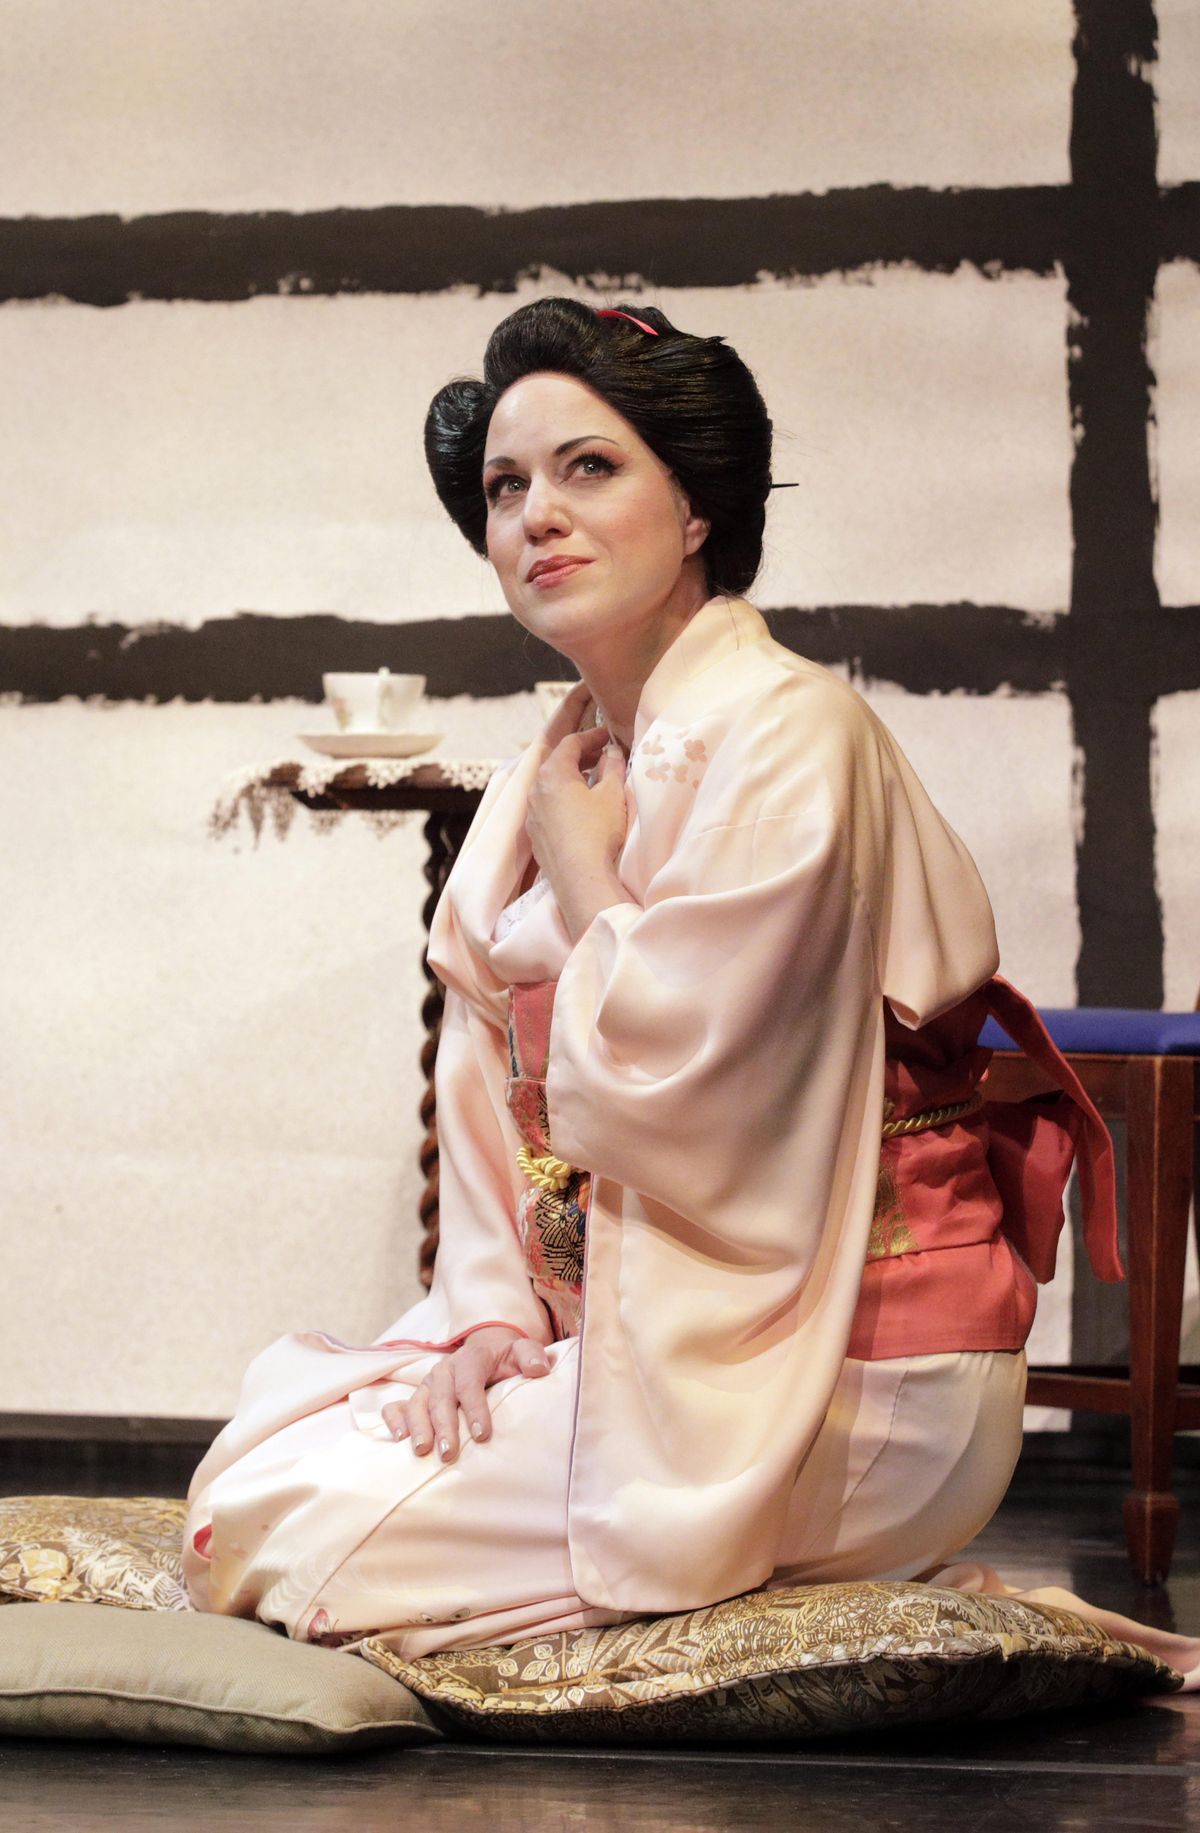 Elizabeth Caballero as Cio-Cio San in Inland Northwest Opera’s “Madame Butterfly” at Martin Woldson Theater at the Fox. (Cory Weaver / For Inland Northwest Opera)